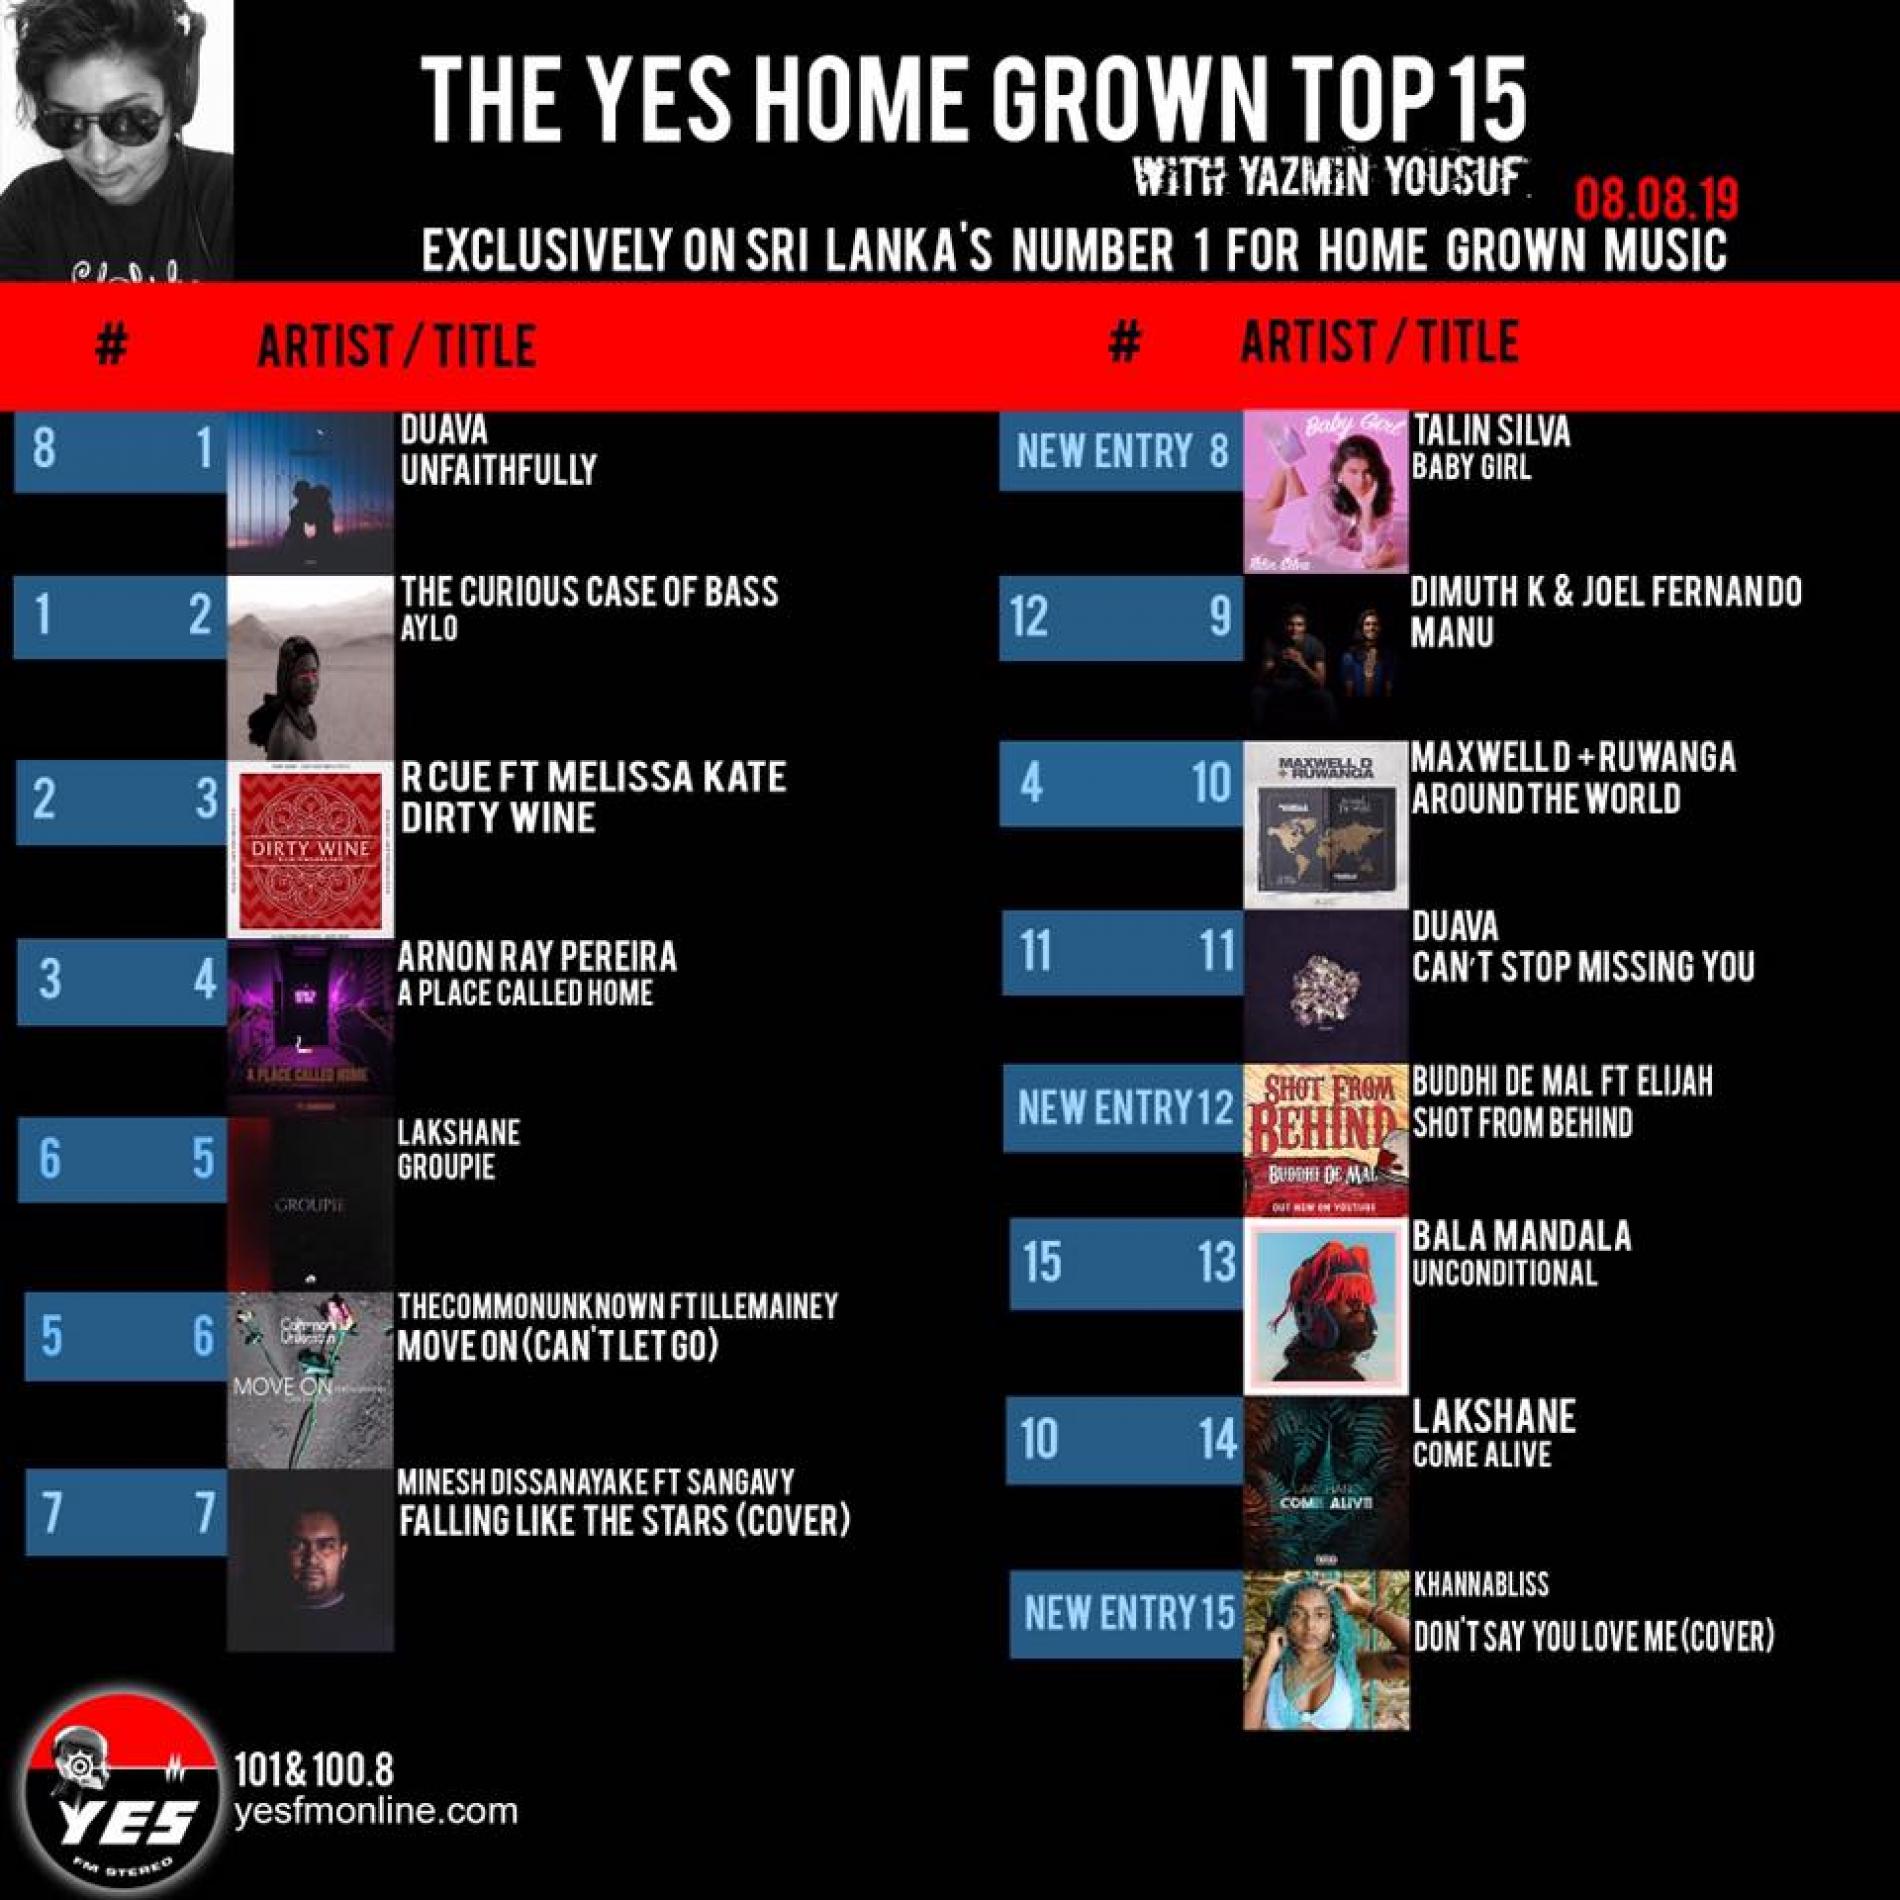 Duava Hits Number 1 On The YES Home Grown Top 15